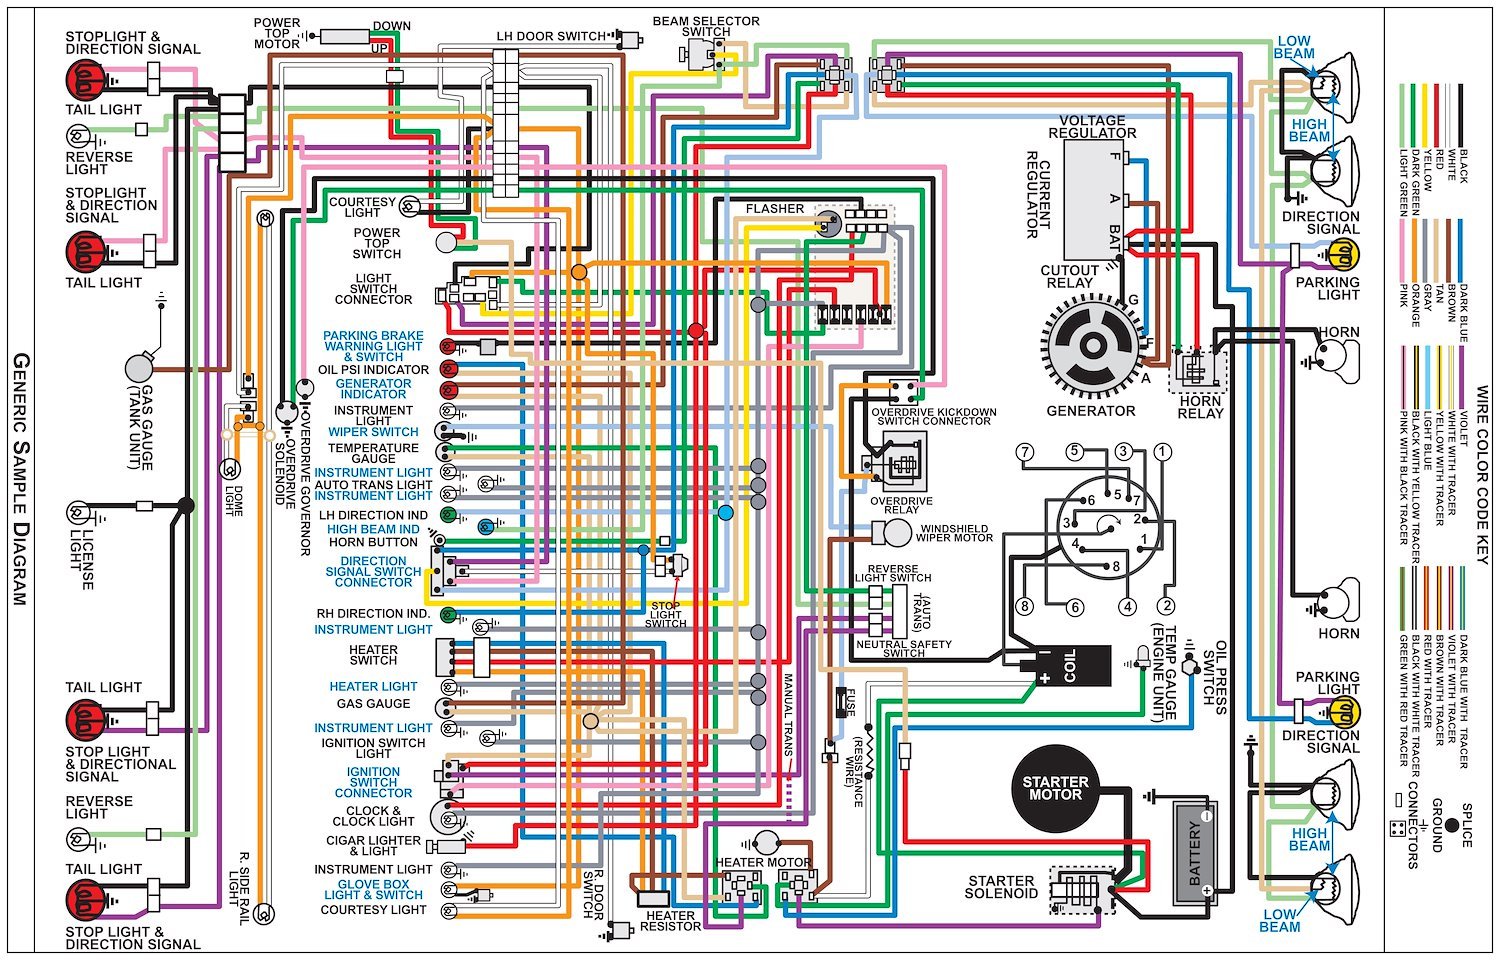 Wiring Diagram for 1968 Plymouth Belvedere, GTX, Road Runner, Satellite, 11 in x 17 in., Laminated